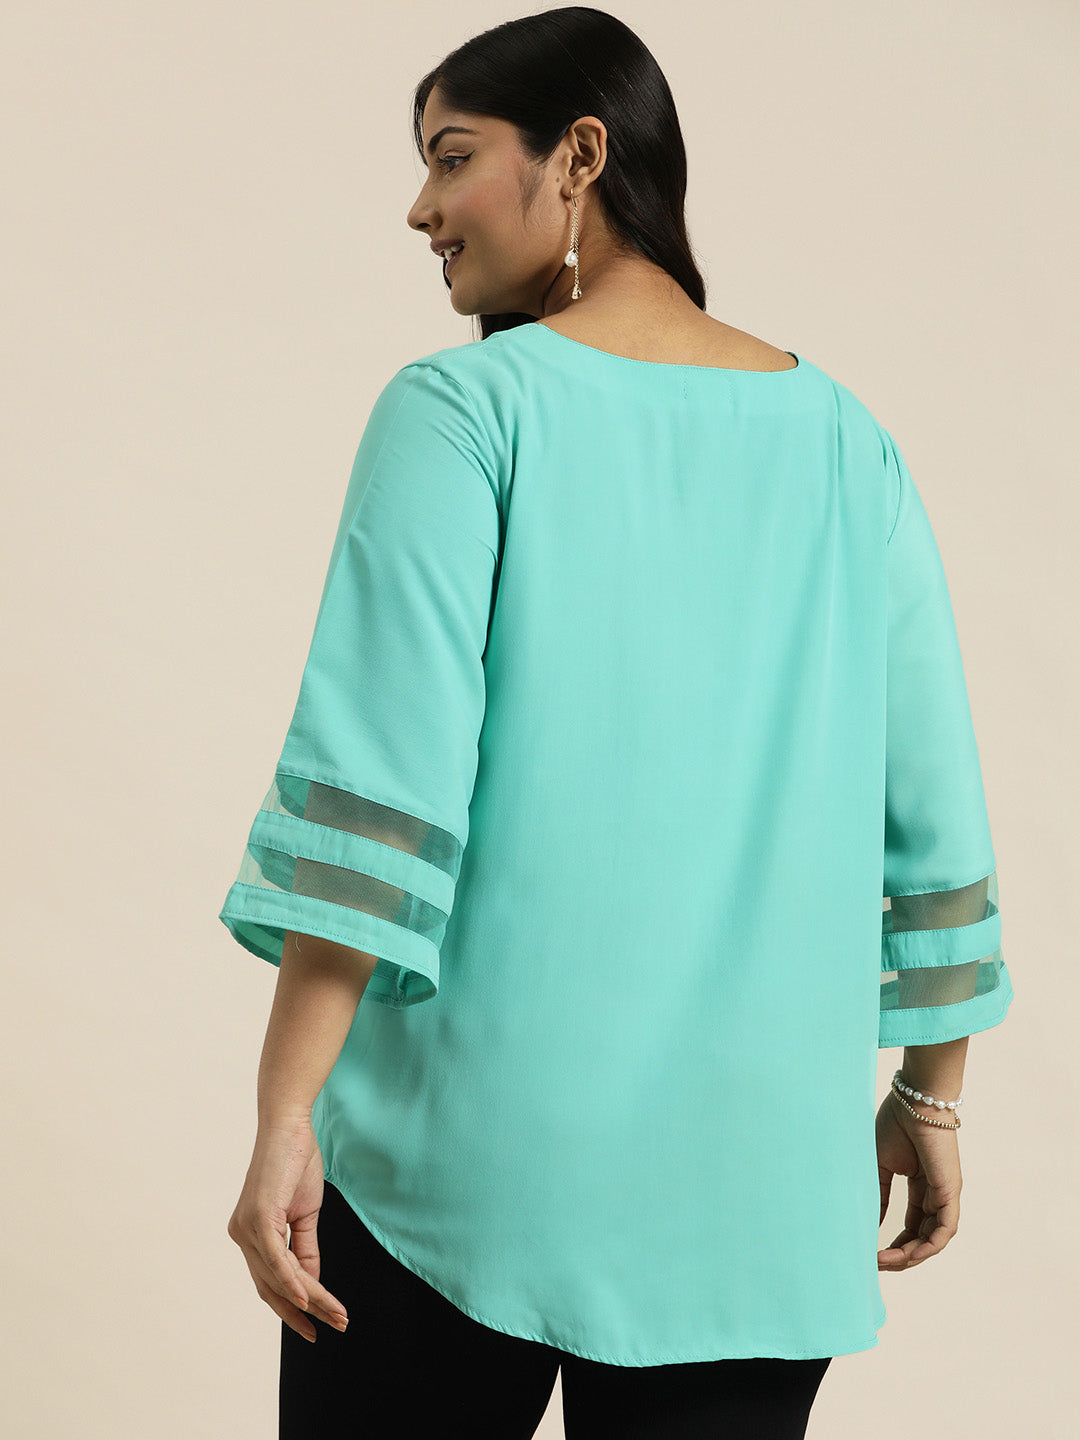 Turquoise Top With stylish Mesh Bell Sleeves